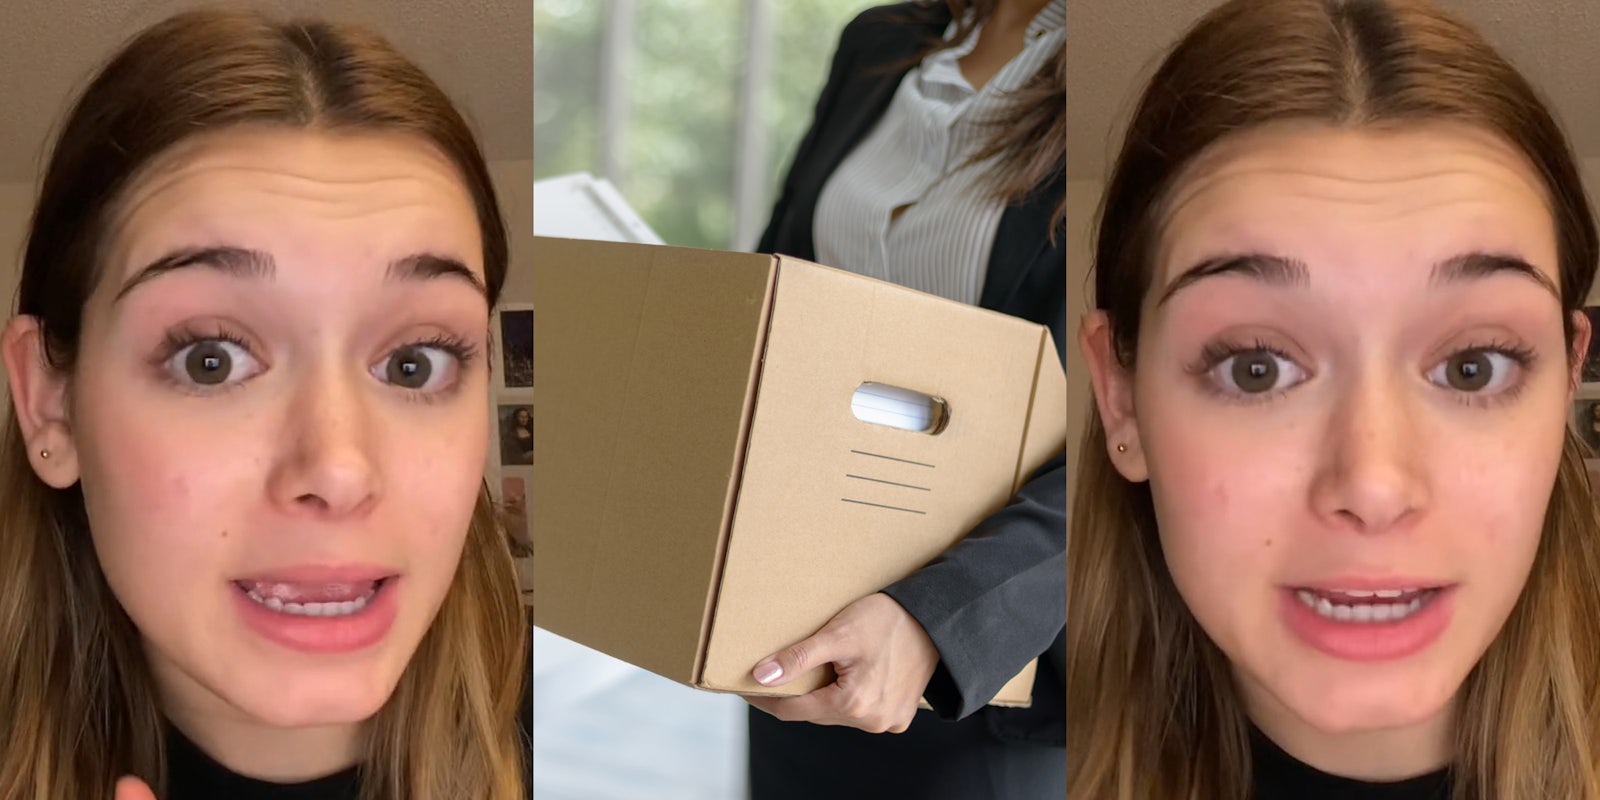 woman speaking (l) woman holding belongings packed into box, quitting job concept (c) woman speaking (r)